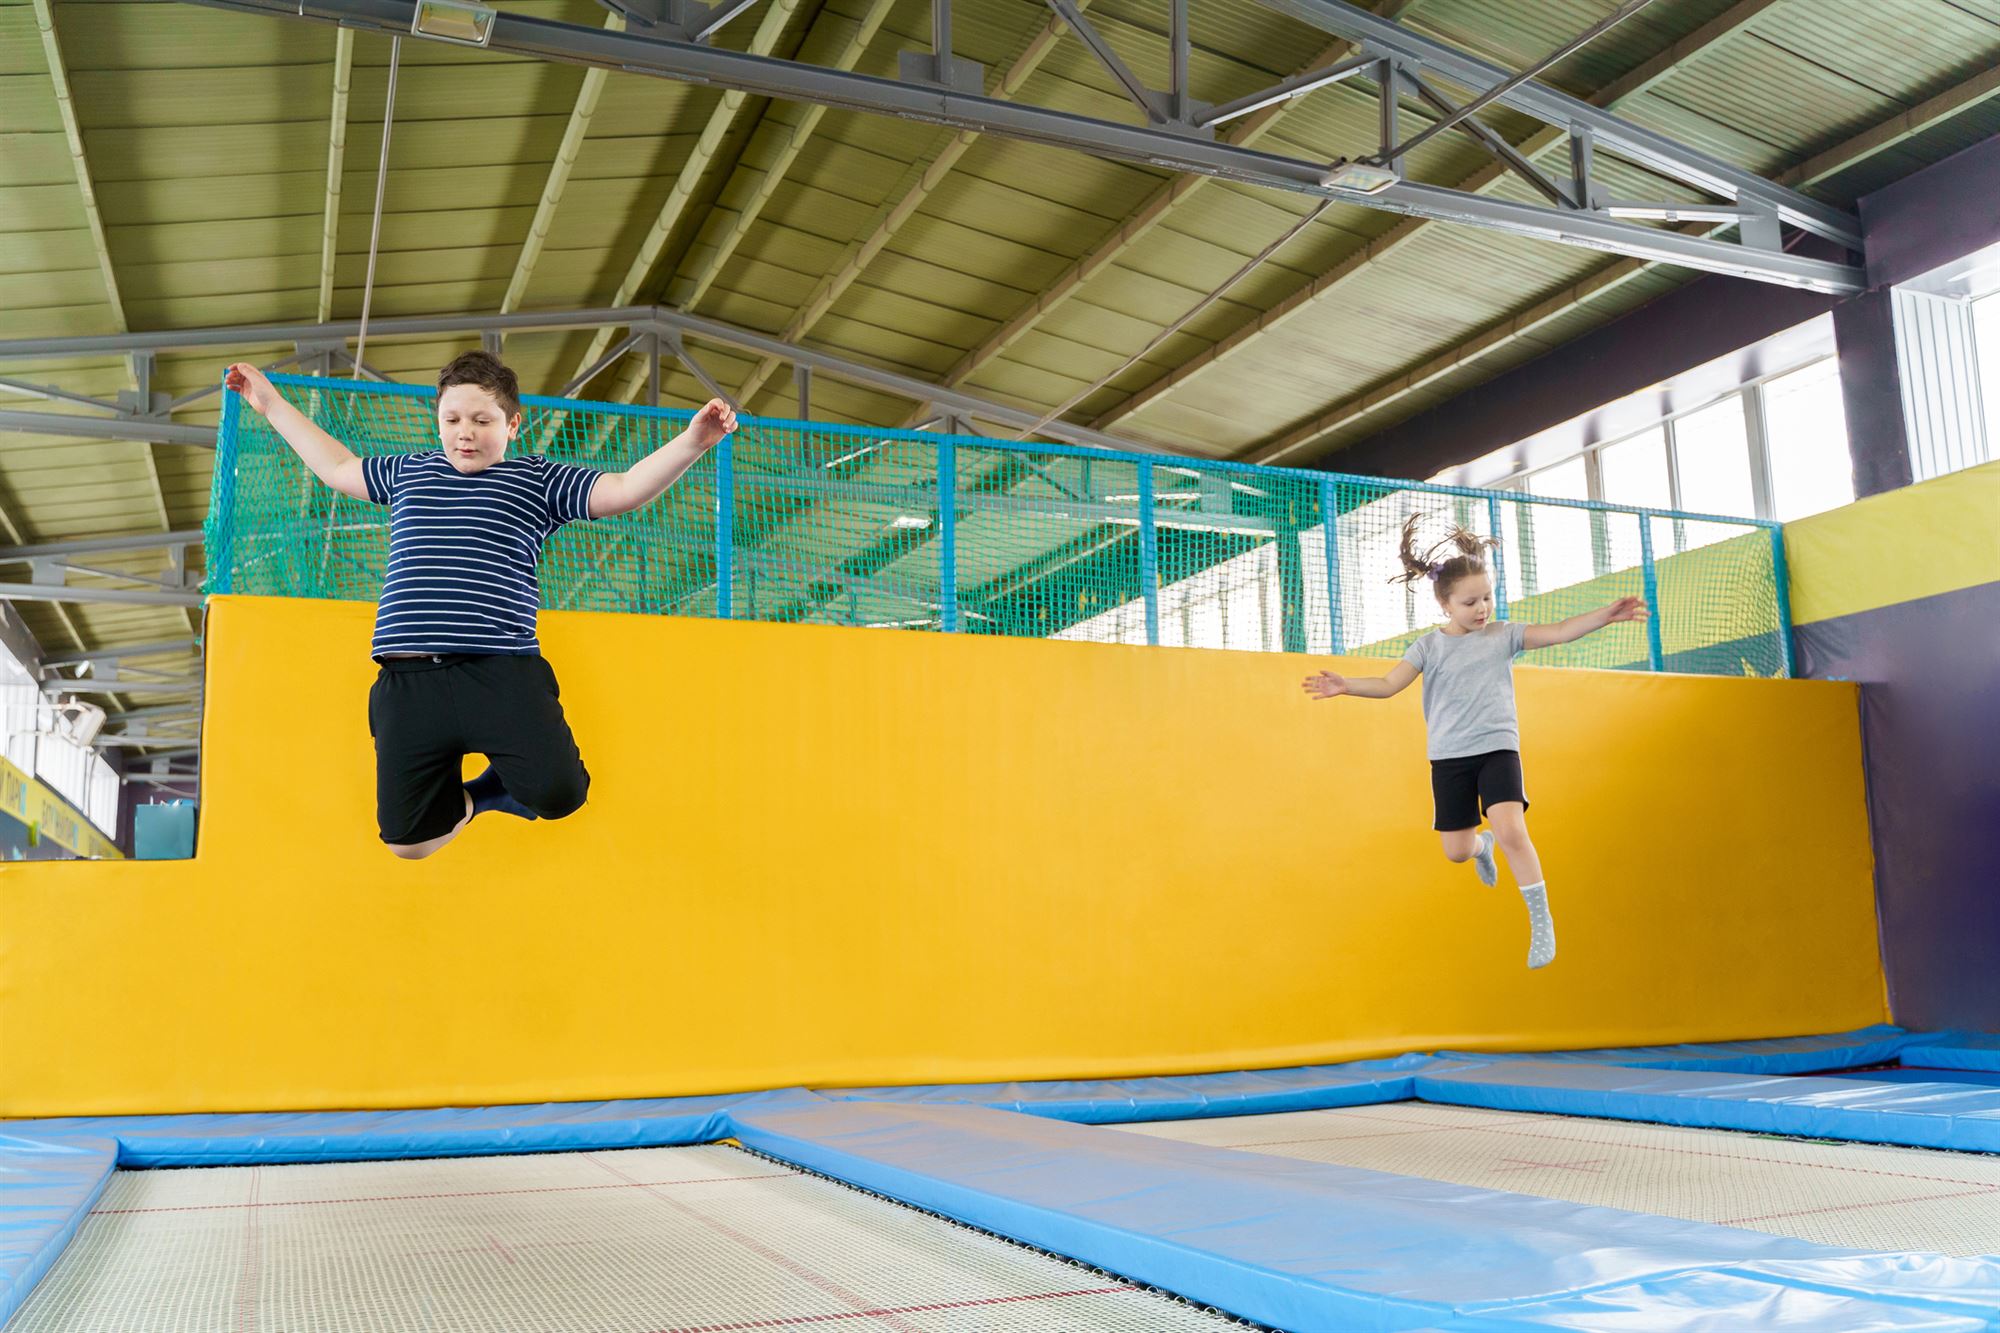 Top 10 Best Trampoline Parks near VICTOR, NY 14564 - Last Updated